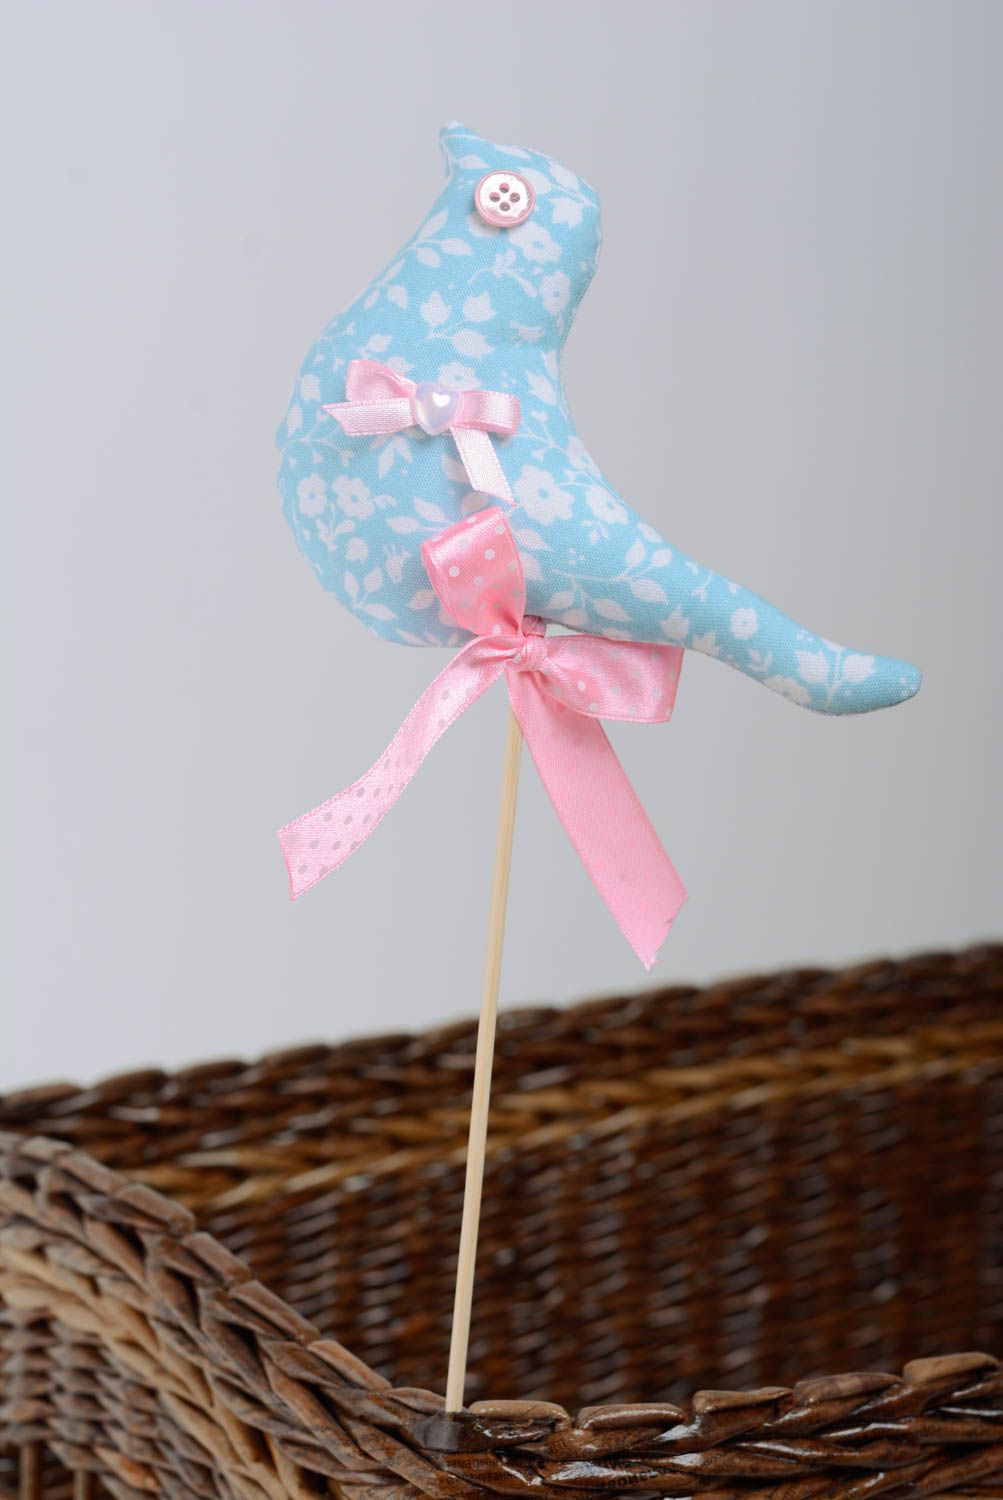 Toy on stick for flower pots decoration blue bird with a pink bow hand made photo 1